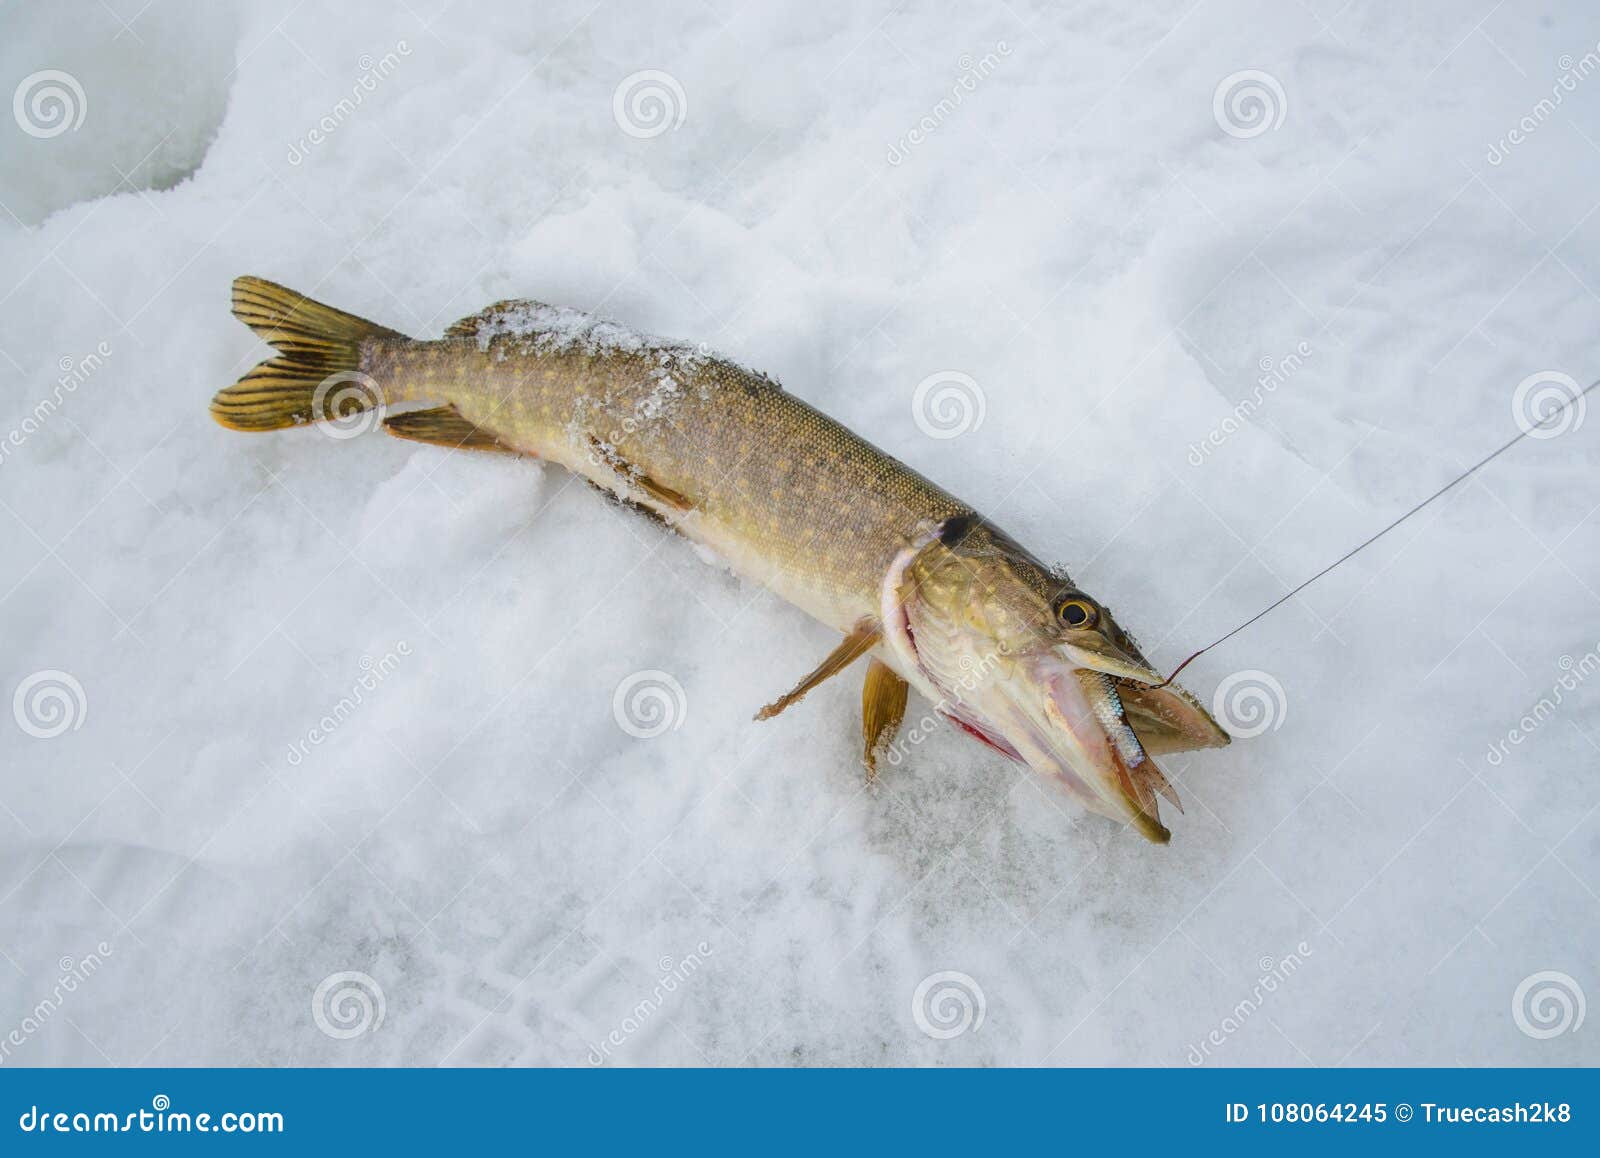 Just Caught Pike Swallow a Fish, Ice Winter Fishing for Live Bait